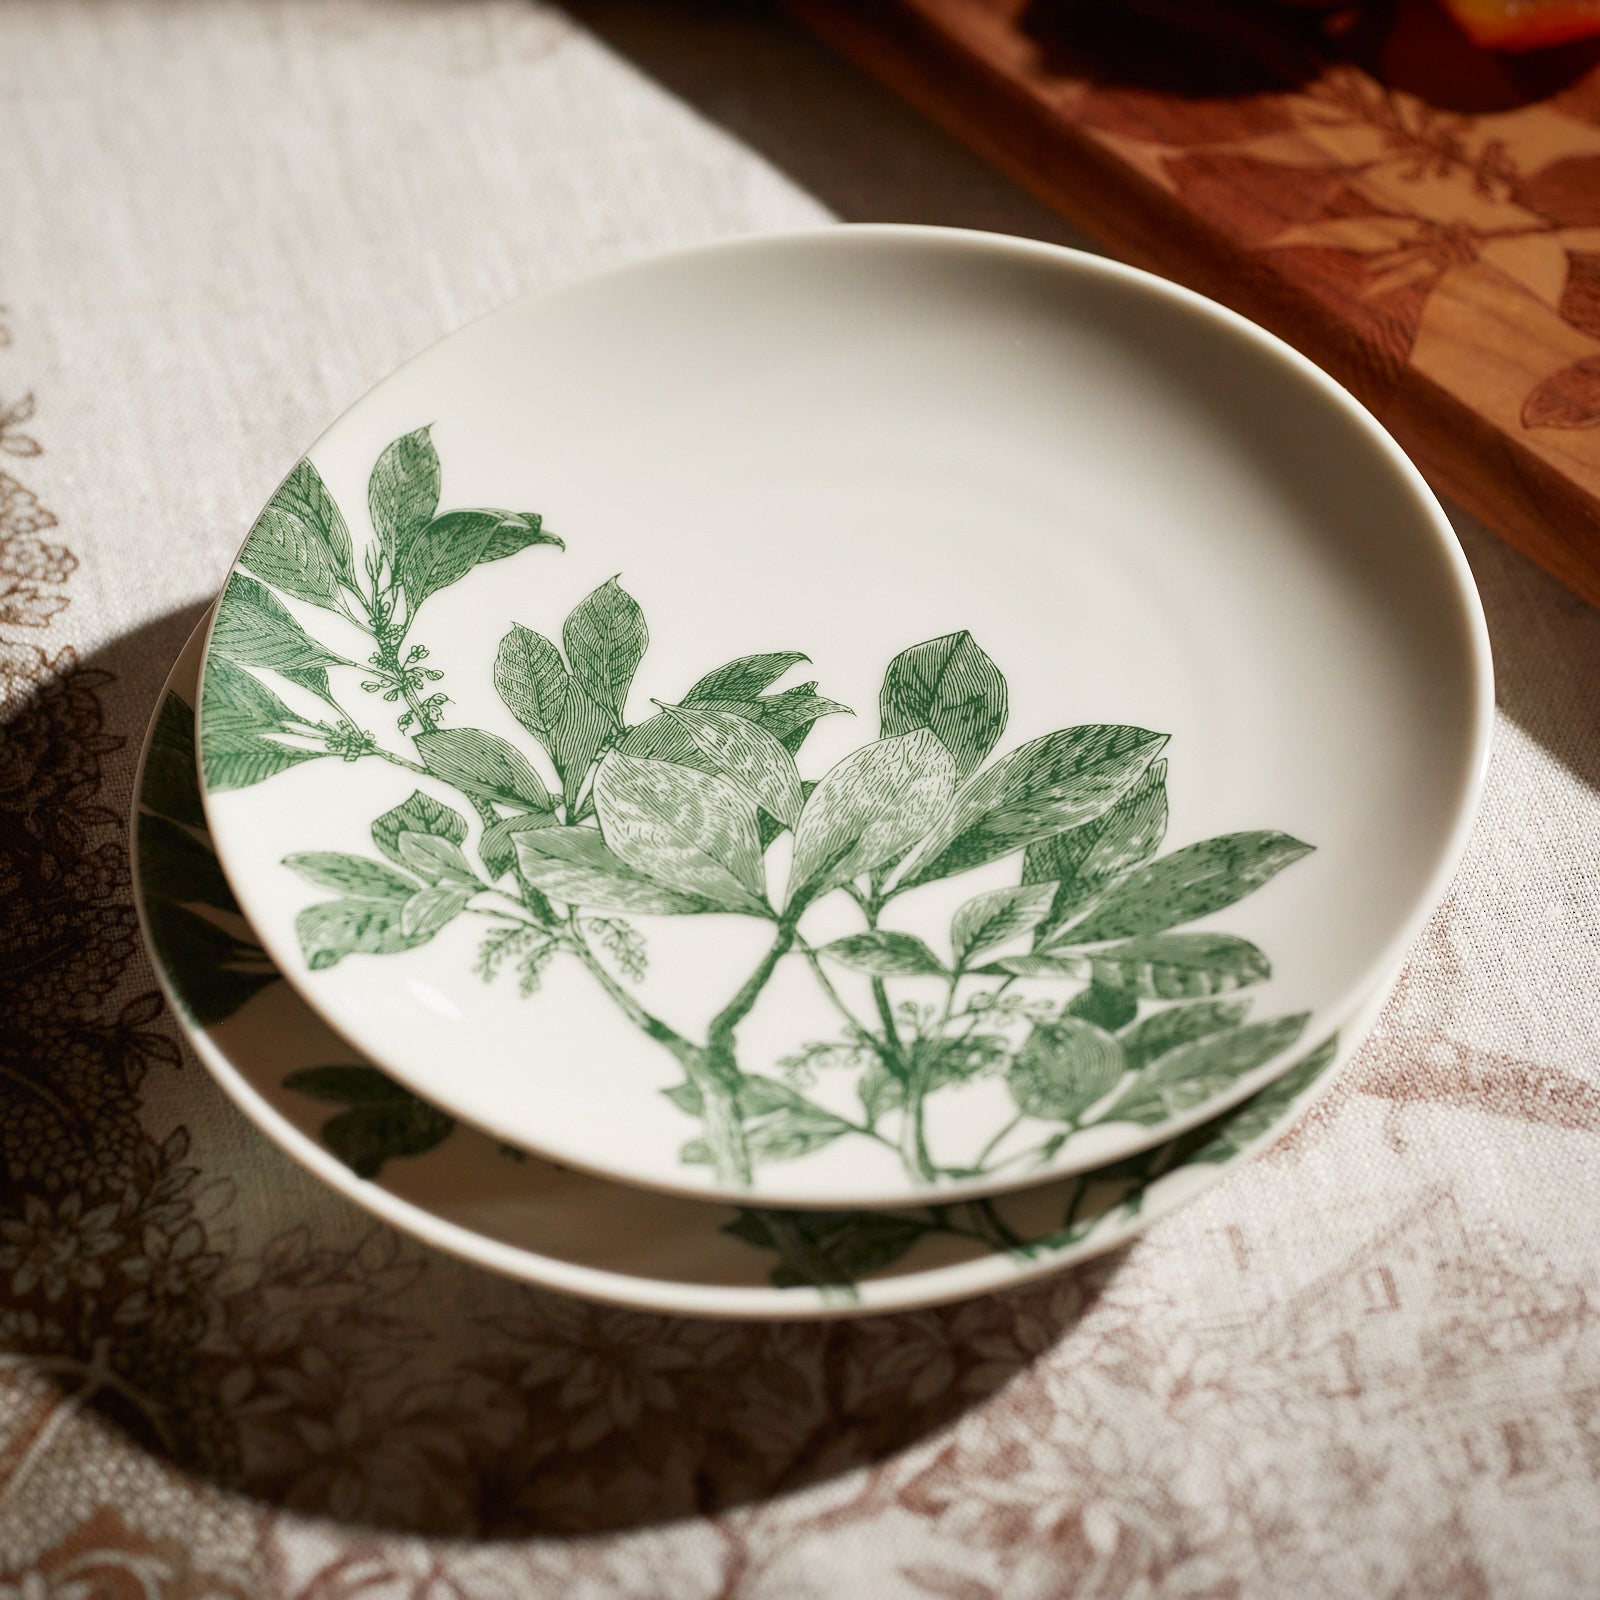 Four Caskata Arbor Green Small Plates with green leaf patterns are arranged in a semi-overlapping manner, creating a delightful botanical dinnerware display.